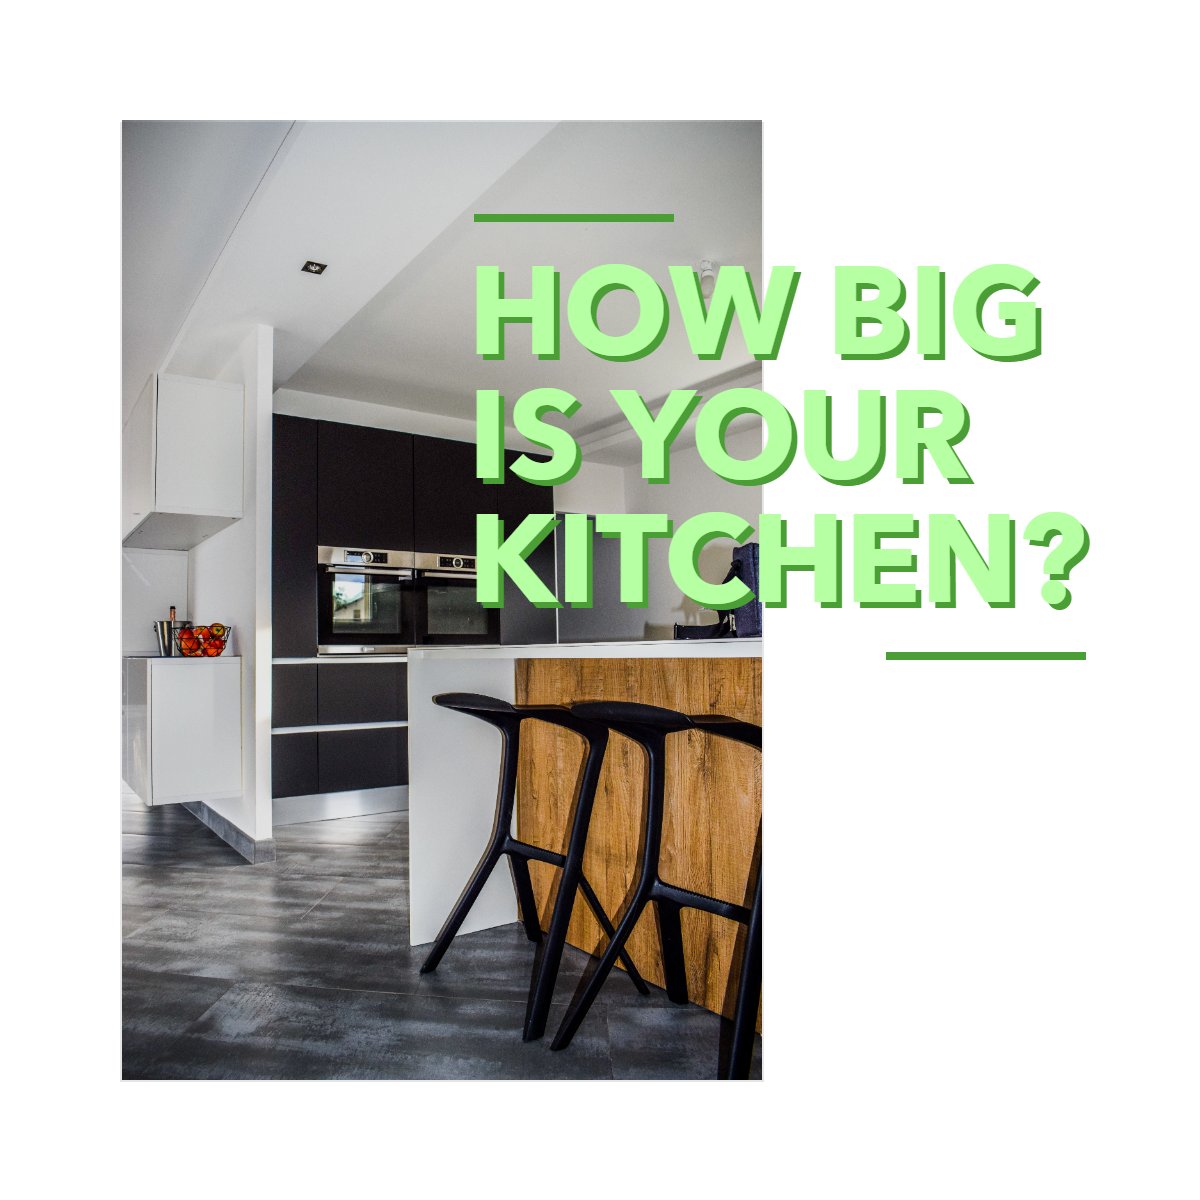 In the US the average Kitchen size for single homes is 161 square feet 😲

How big is your kitchen? Tell us in the comments!  👇

#realestate #kitchensize #kitchen #homes

 #Karencynowa #charlottenc #luxuryrealestate #bestrealtorincharlottenc #Fortmillsc